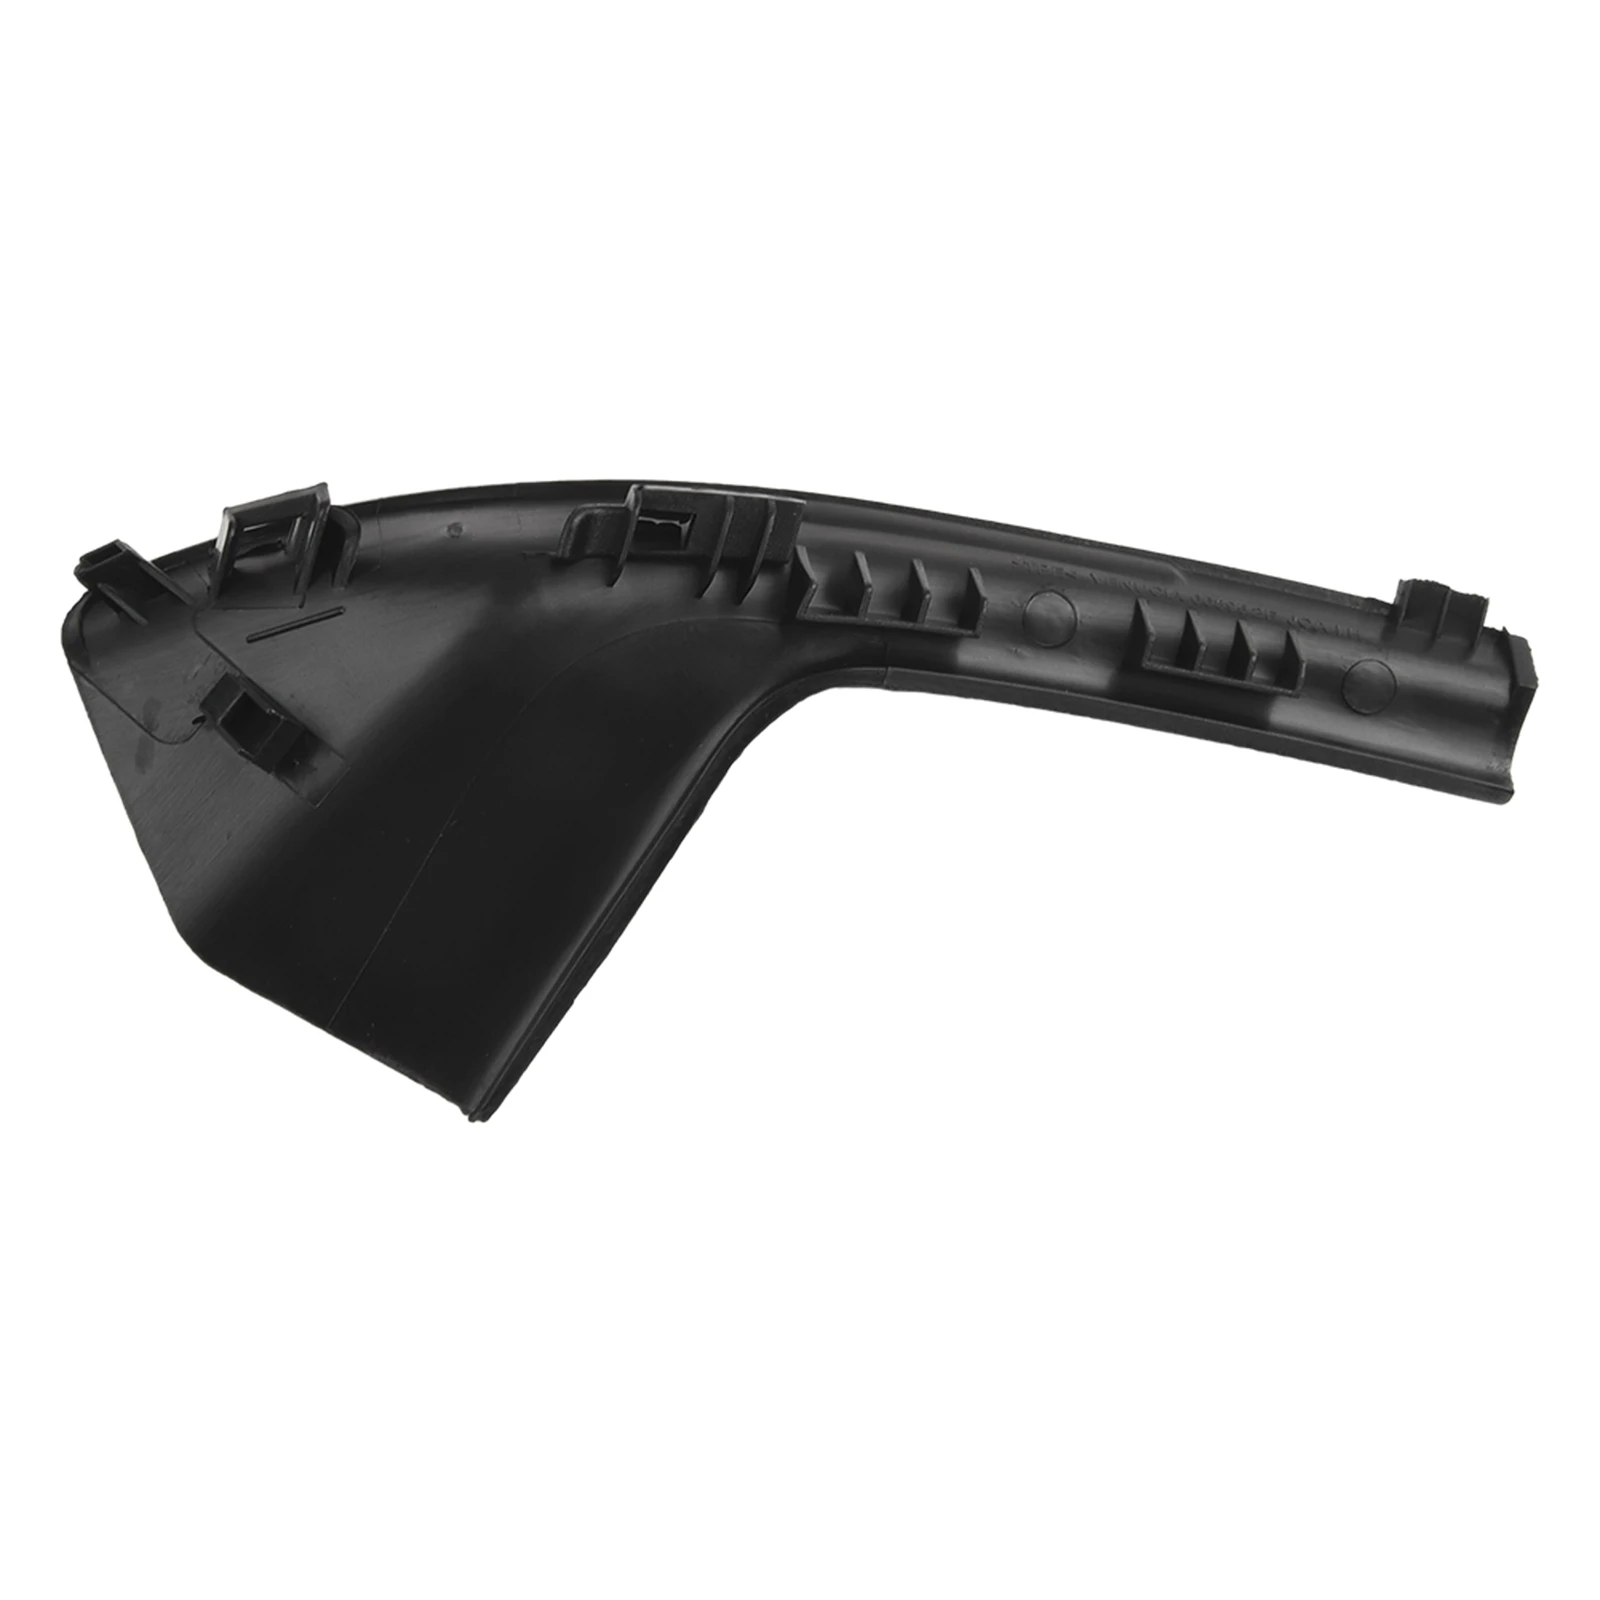 

Improve the Look and Functionality of Your For Nissan Tiida with this Car Windshield Wiper Side Trim Cover Durable